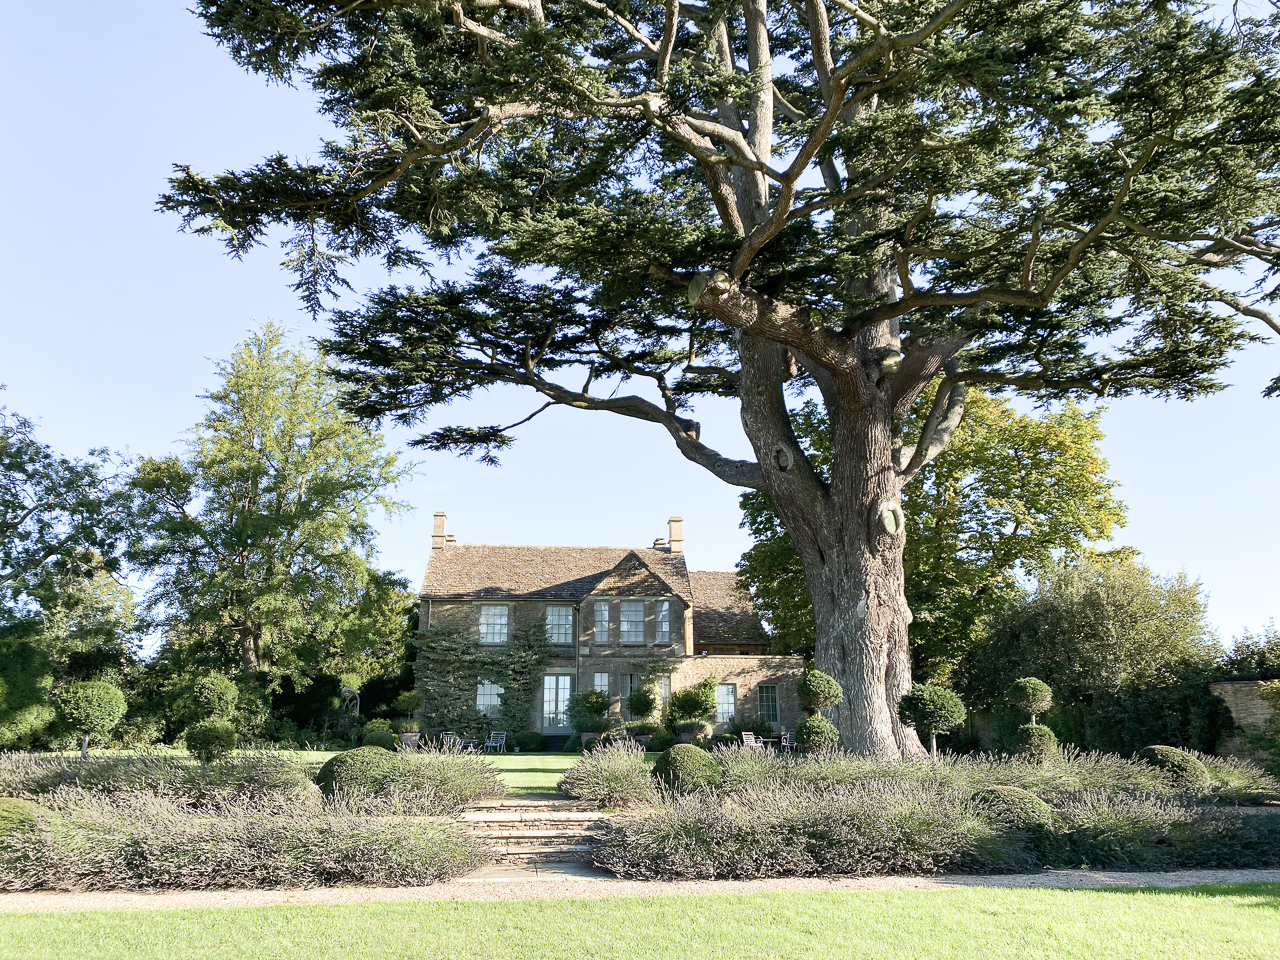 Thyme Hotel review - an honest view of this luxury hotel and Spa in the pretty village of Southrop in the Costwolds